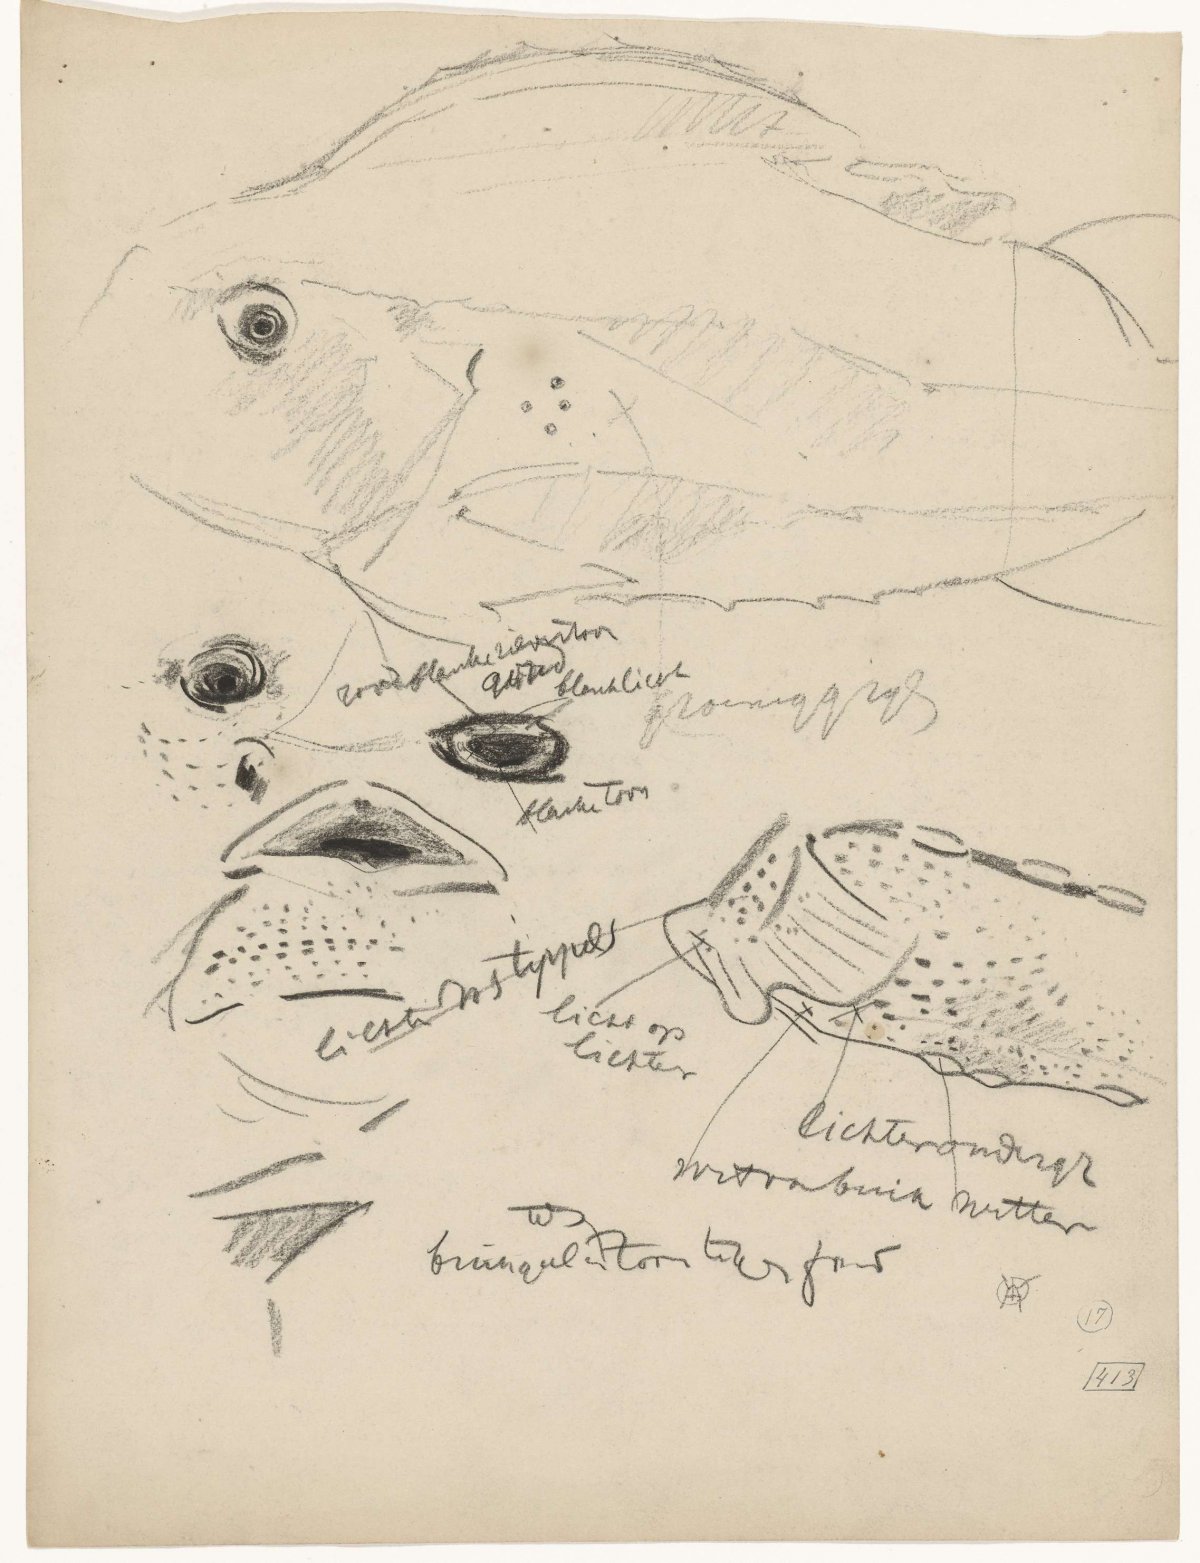 Studies of a snot dolphin, with color notes, Gerrit Willem Dijsselhof, 1876 - 1924